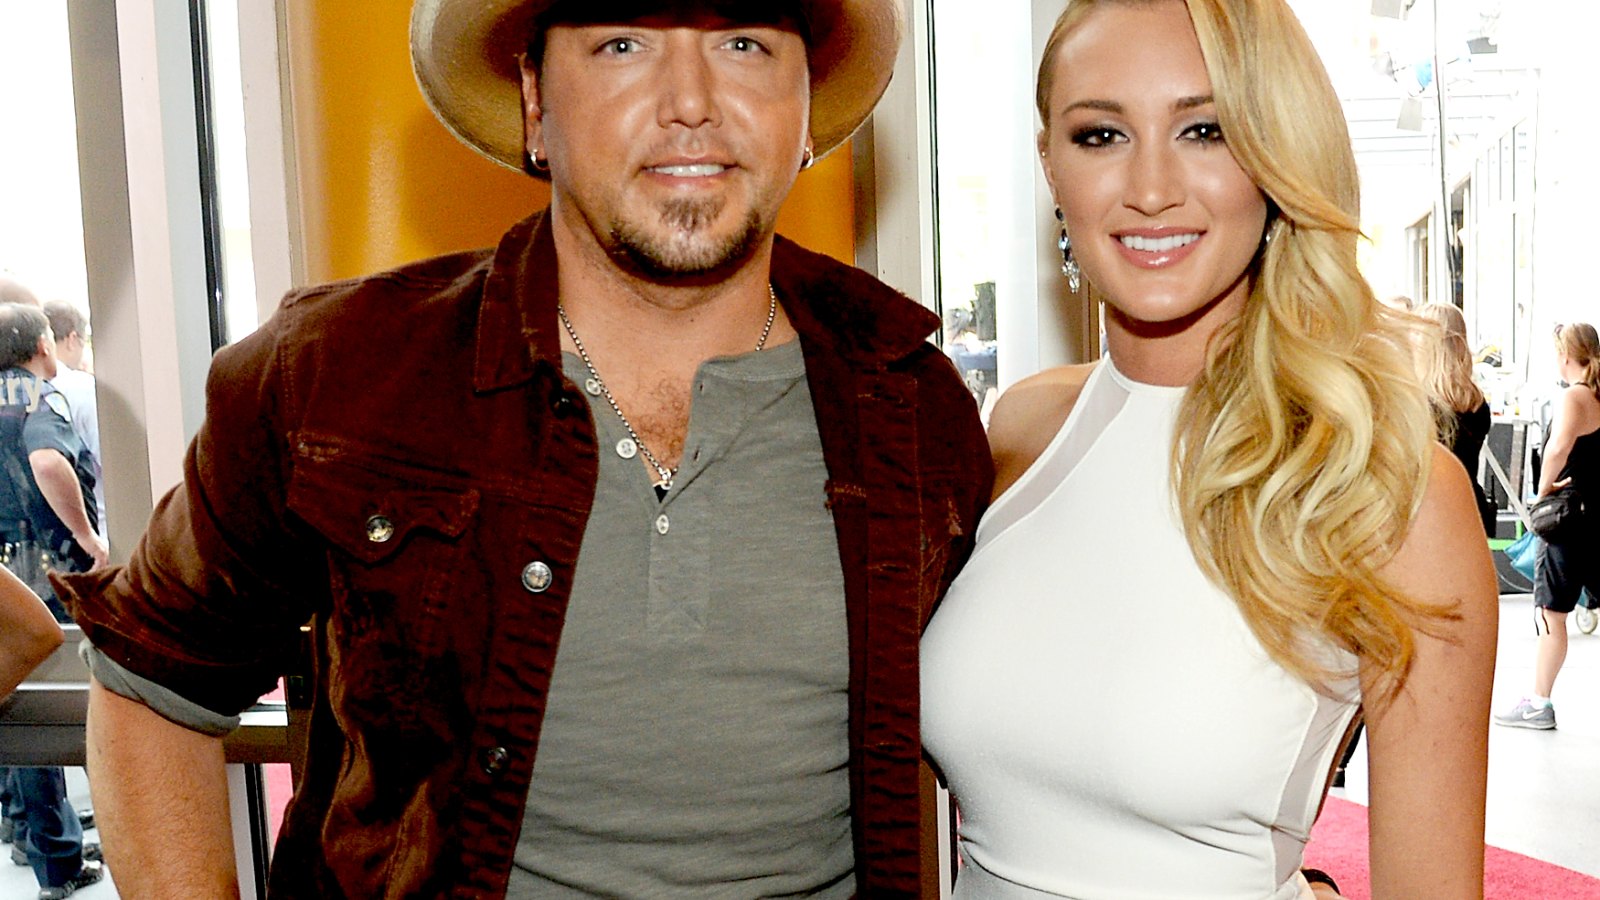 Jason Aldean and Brittany Kerr engaged